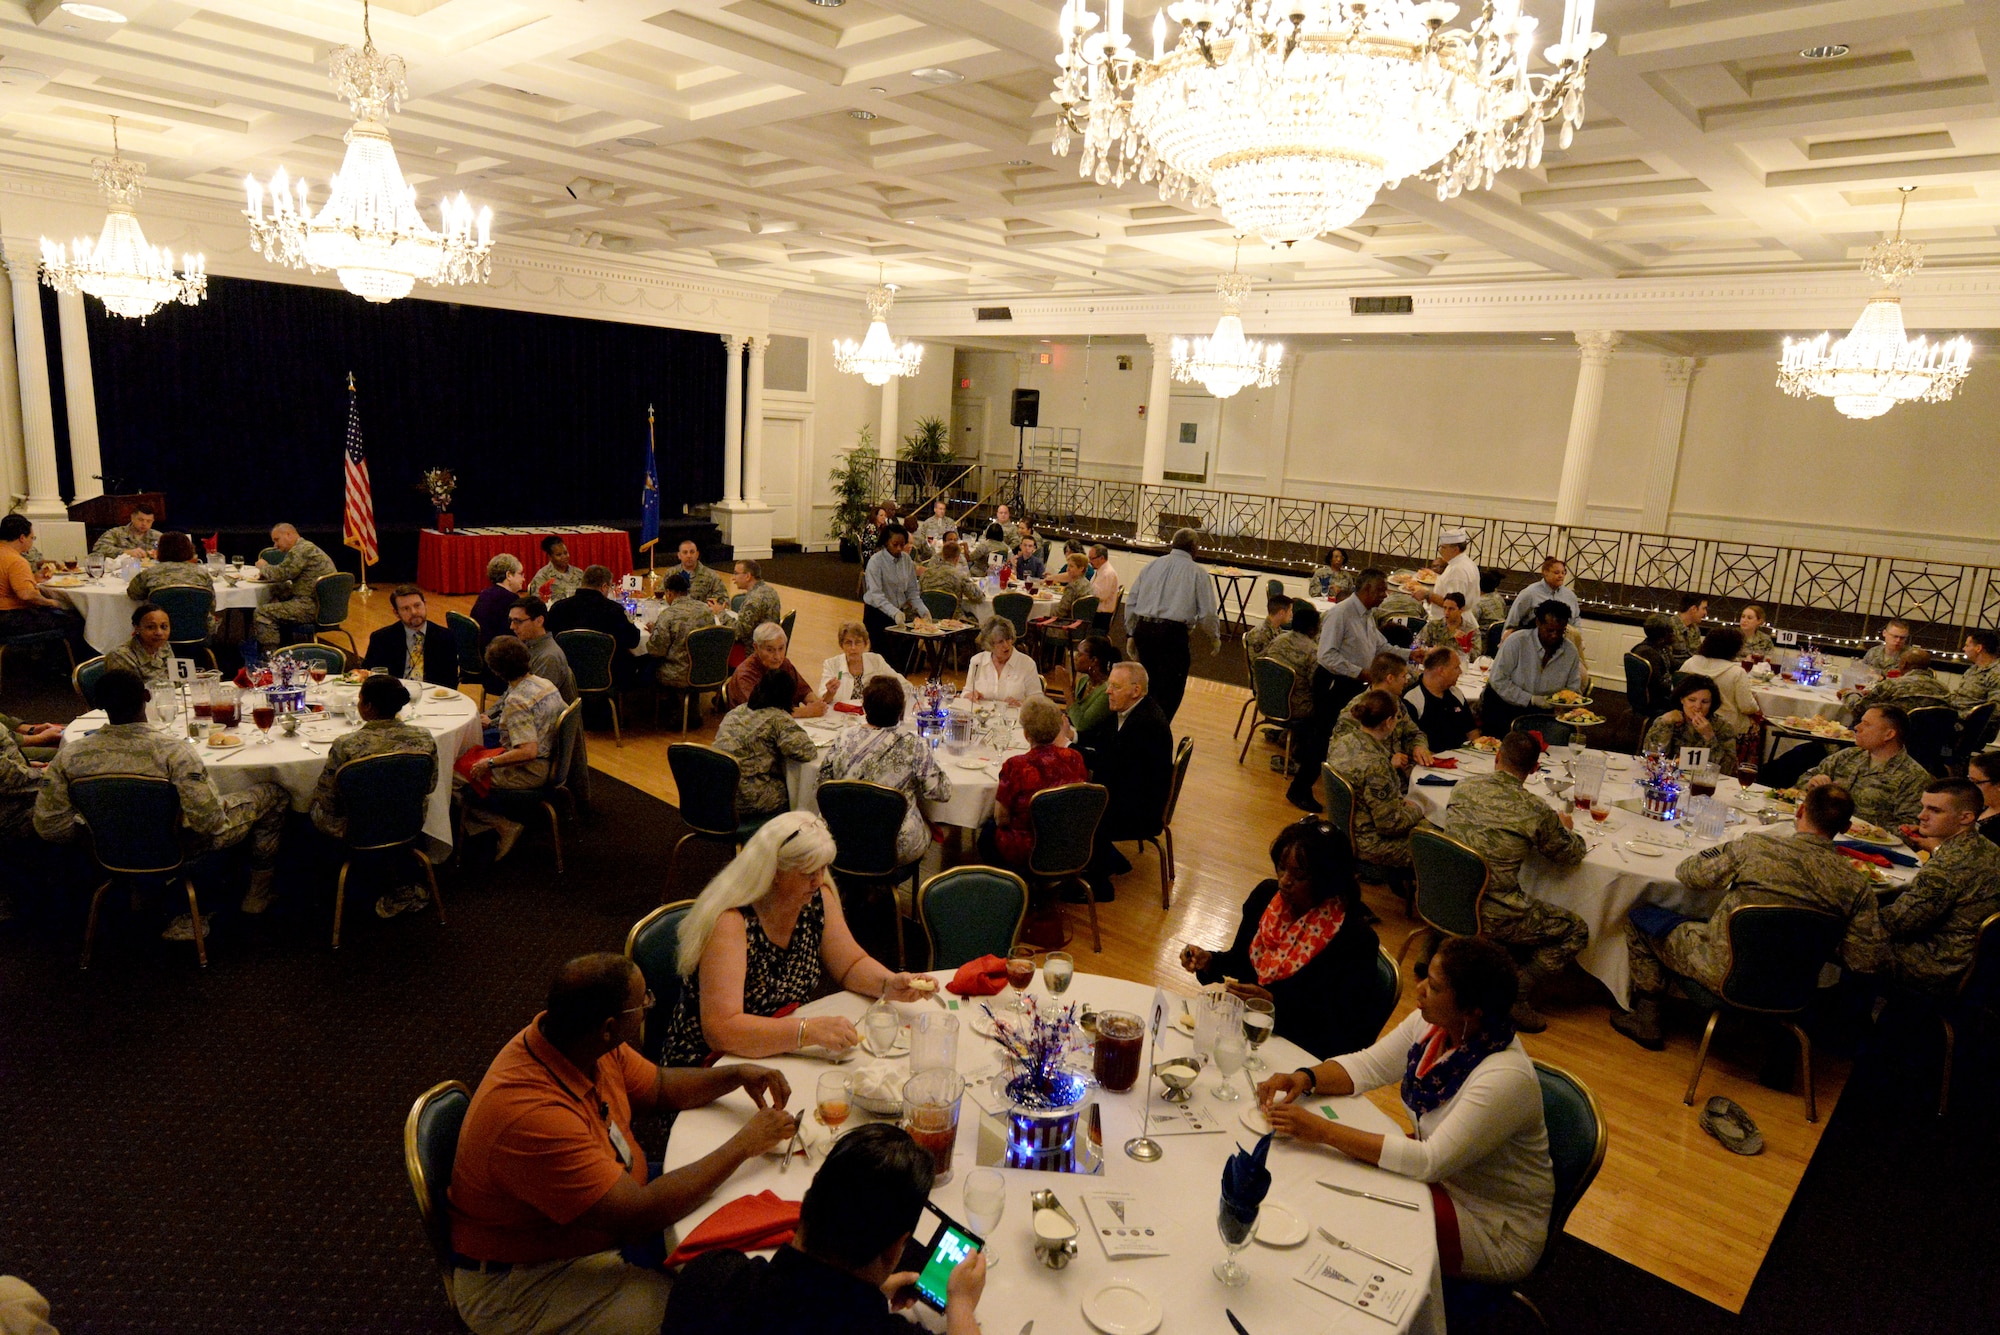 Attendees of the Volunteer Recognition Ceremony luncheon dine together before the presentation of awards, April 21, 2015, Maxwell Air Force Base, Alabama. The ceremony recognized the volunteer service of retirees, active duty military, Department of Defense employees and family members. (U.S. Air Force photo by Airman 1st Class Alexa Culbert/Cleared)